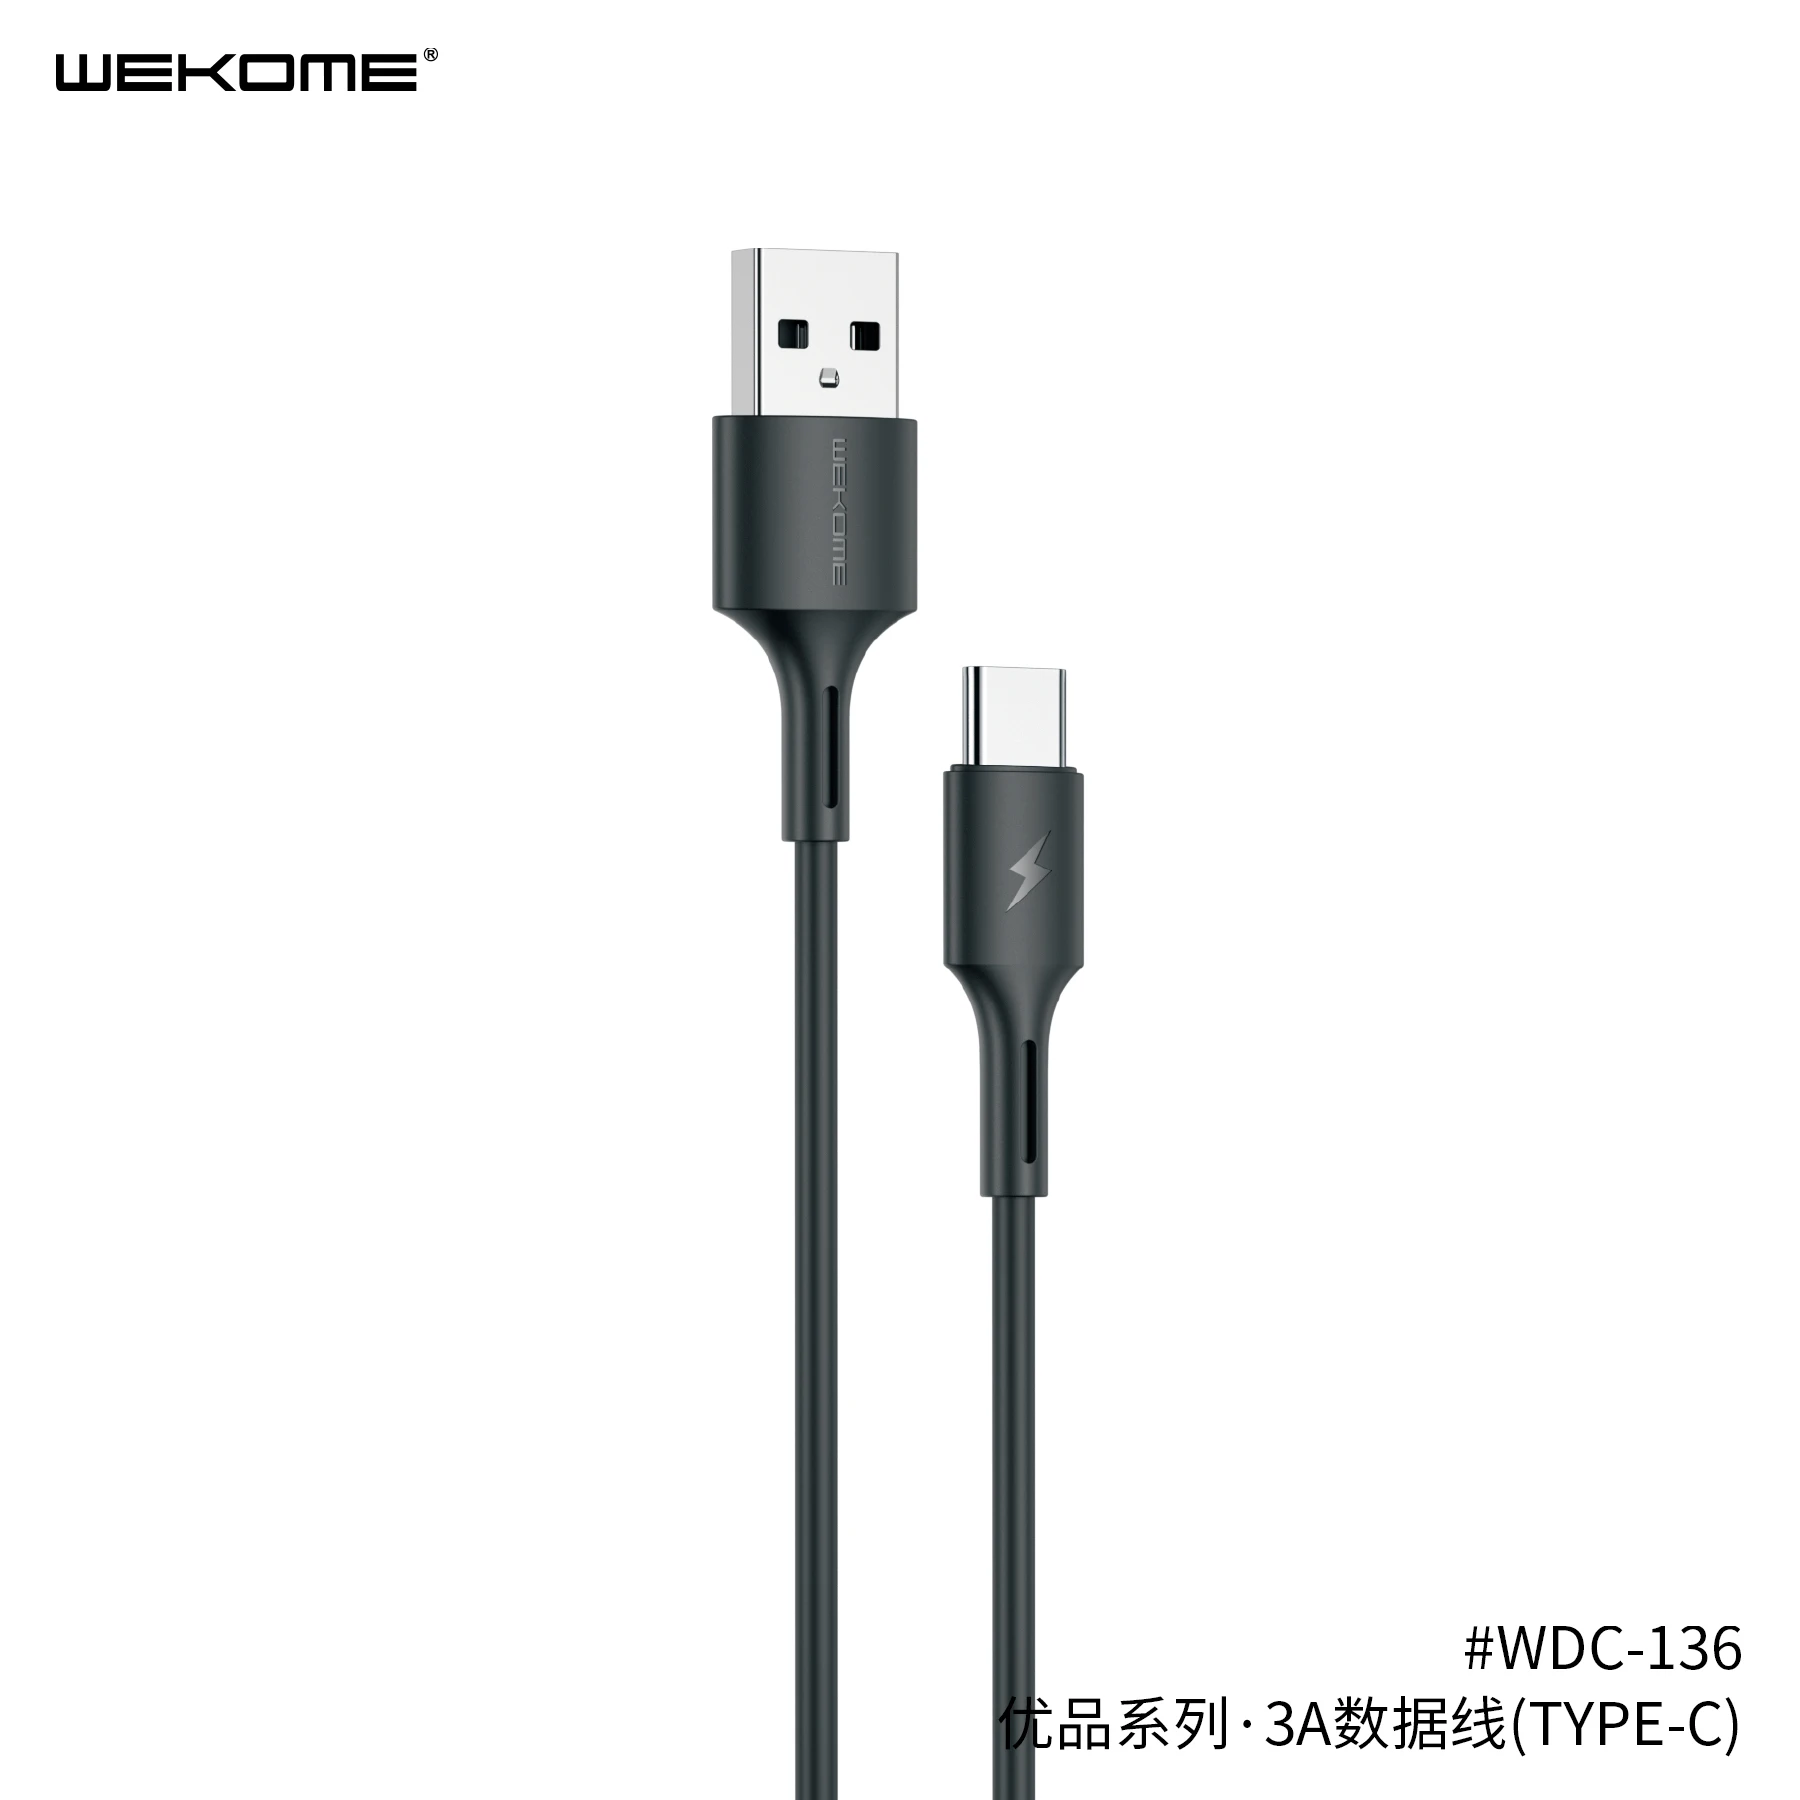 Japan Flag Three-in-one Round Data Cable Mini 3A USB Cable with Type-C Most Smart Phones & Pads 